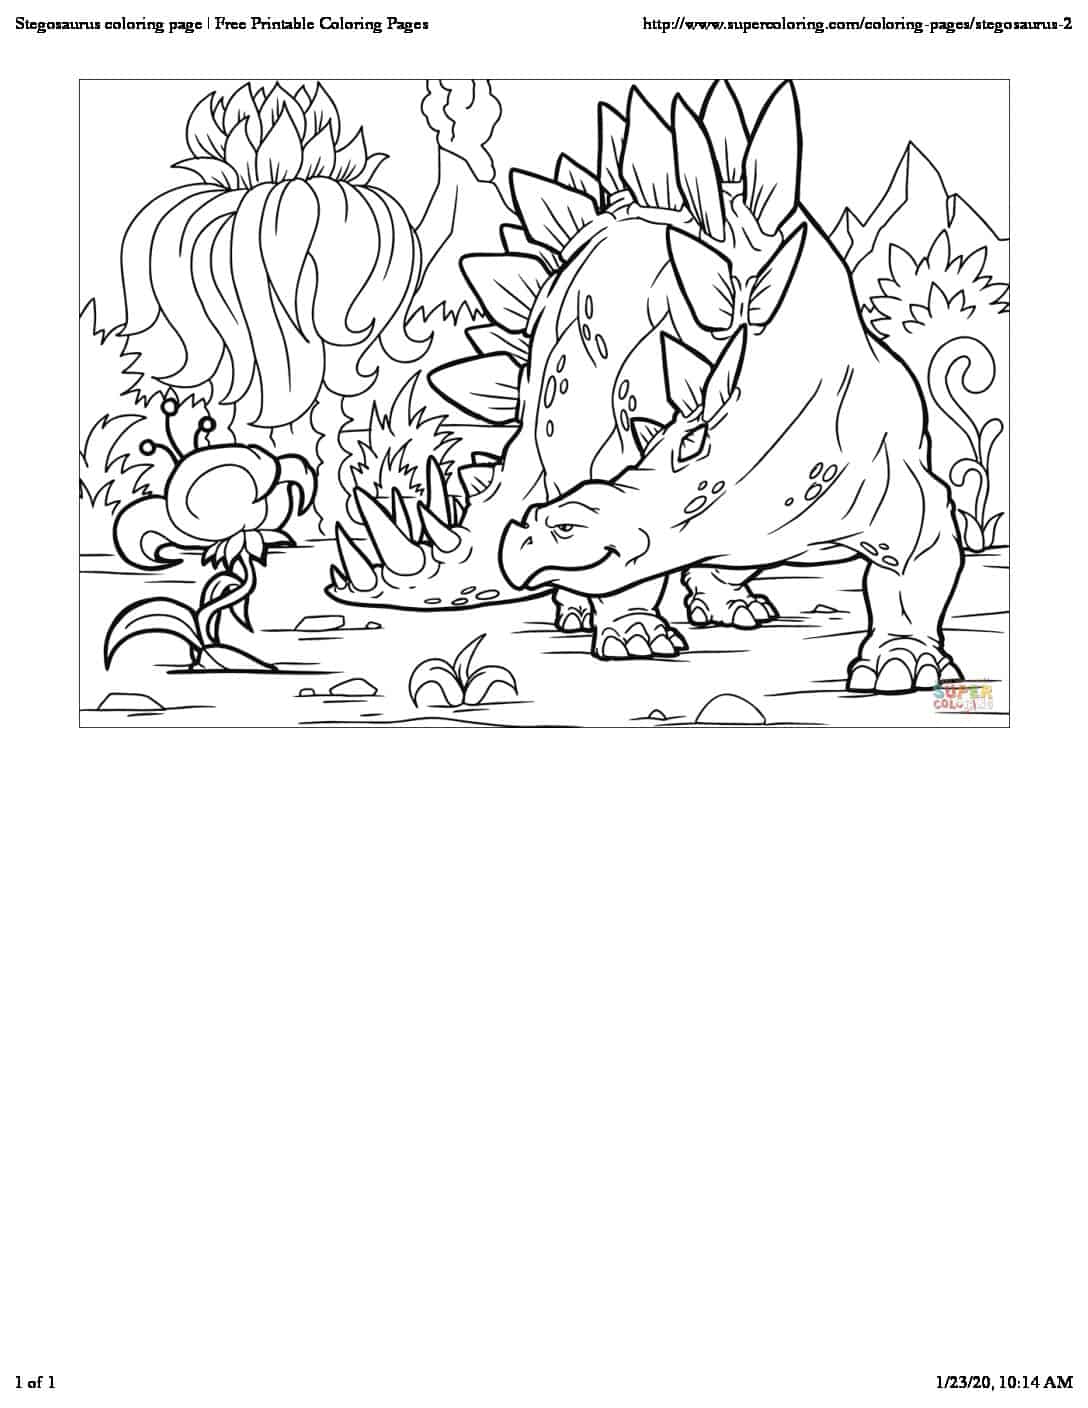 Stegosaurus coloring page | Free Printable Coloring Pages | Keep ...